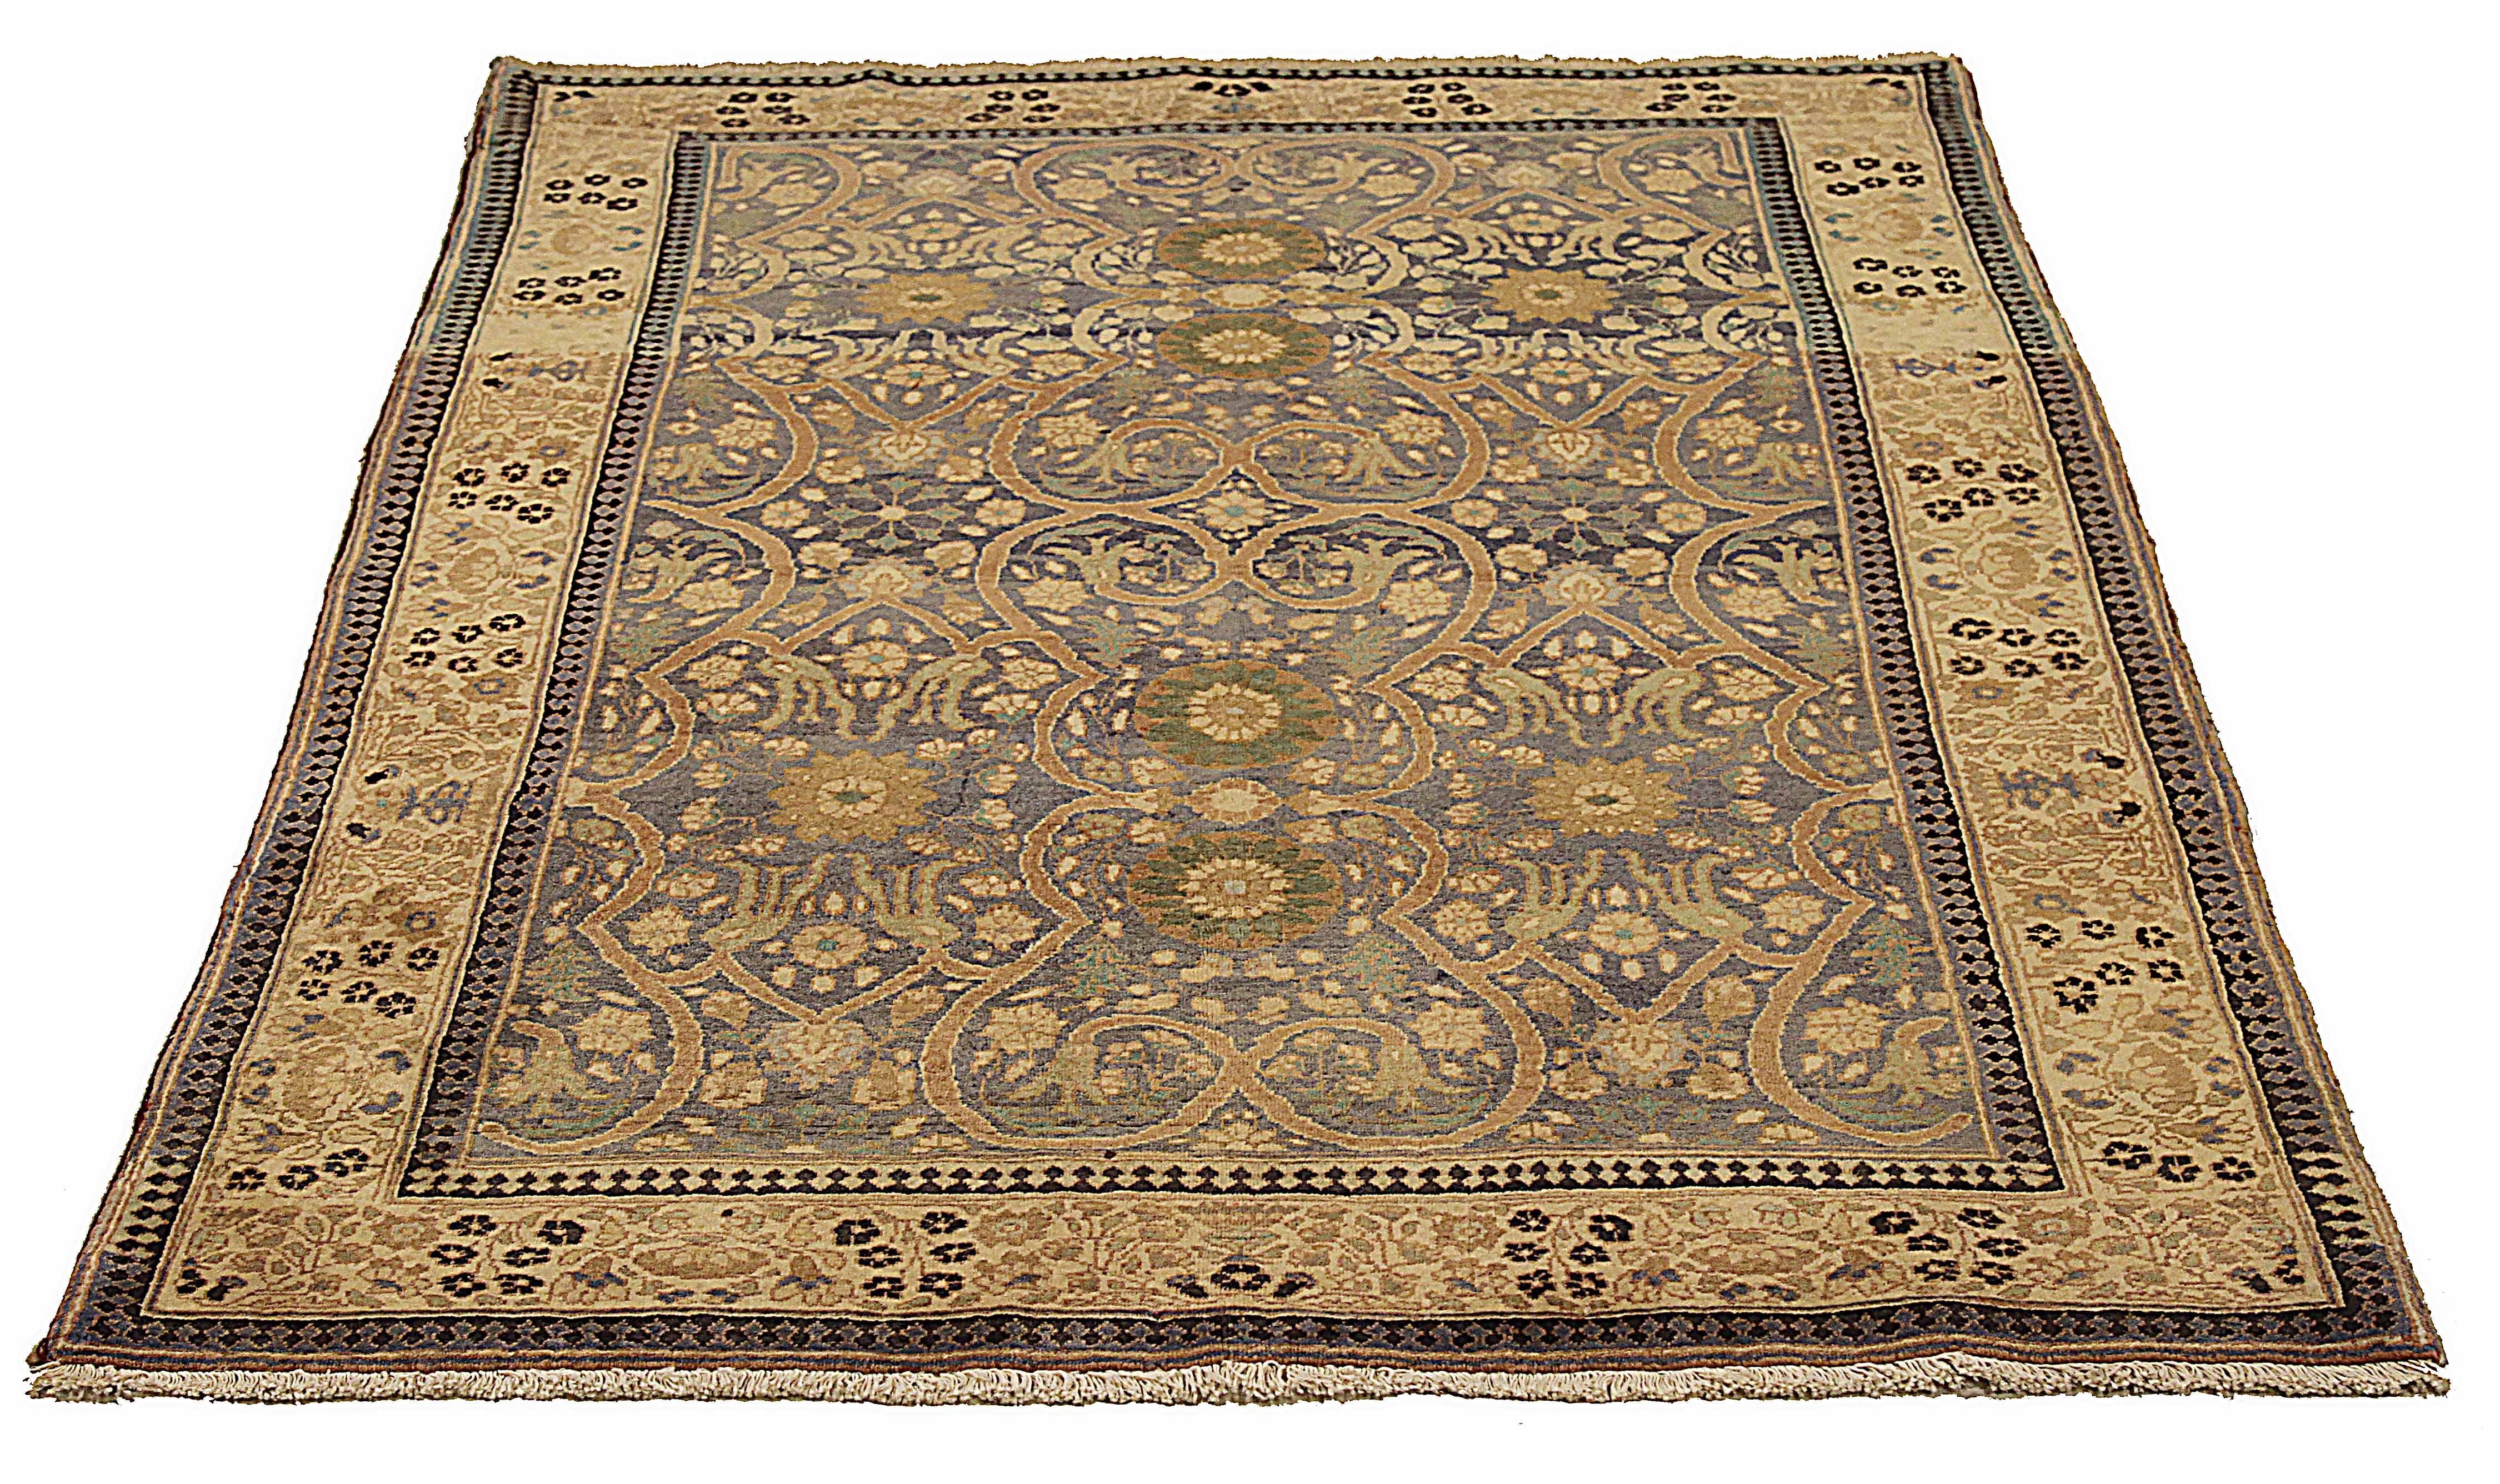 Antique Indian area rug handwoven from the finest sheep’s wool. It’s colored with all-natural vegetable dyes that are safe for humans and pets. It’s a traditional Agra design handwoven by expert artisans. It’s a lovely area rug that can be